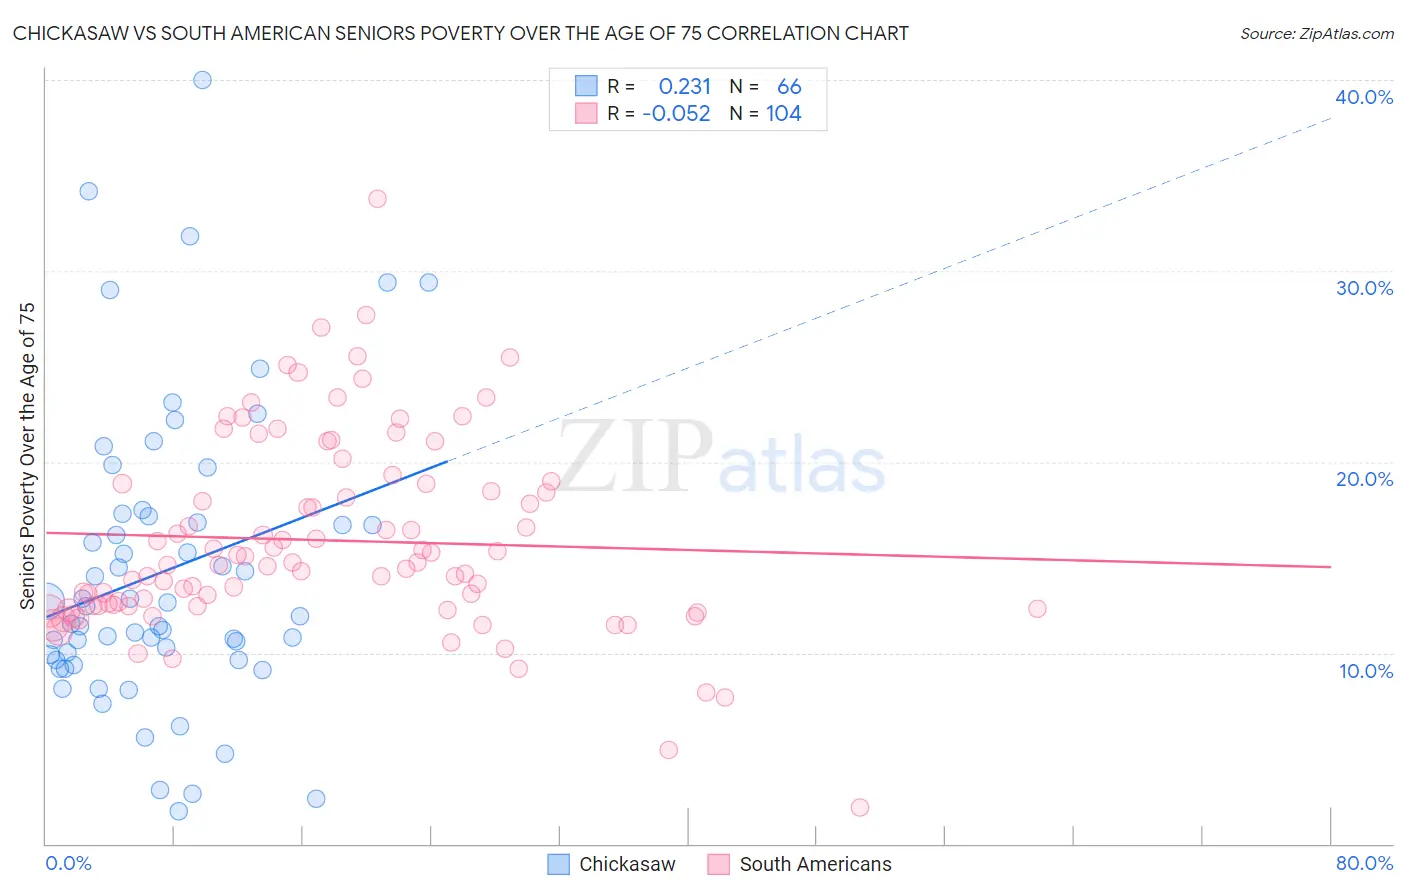 Chickasaw vs South American Seniors Poverty Over the Age of 75